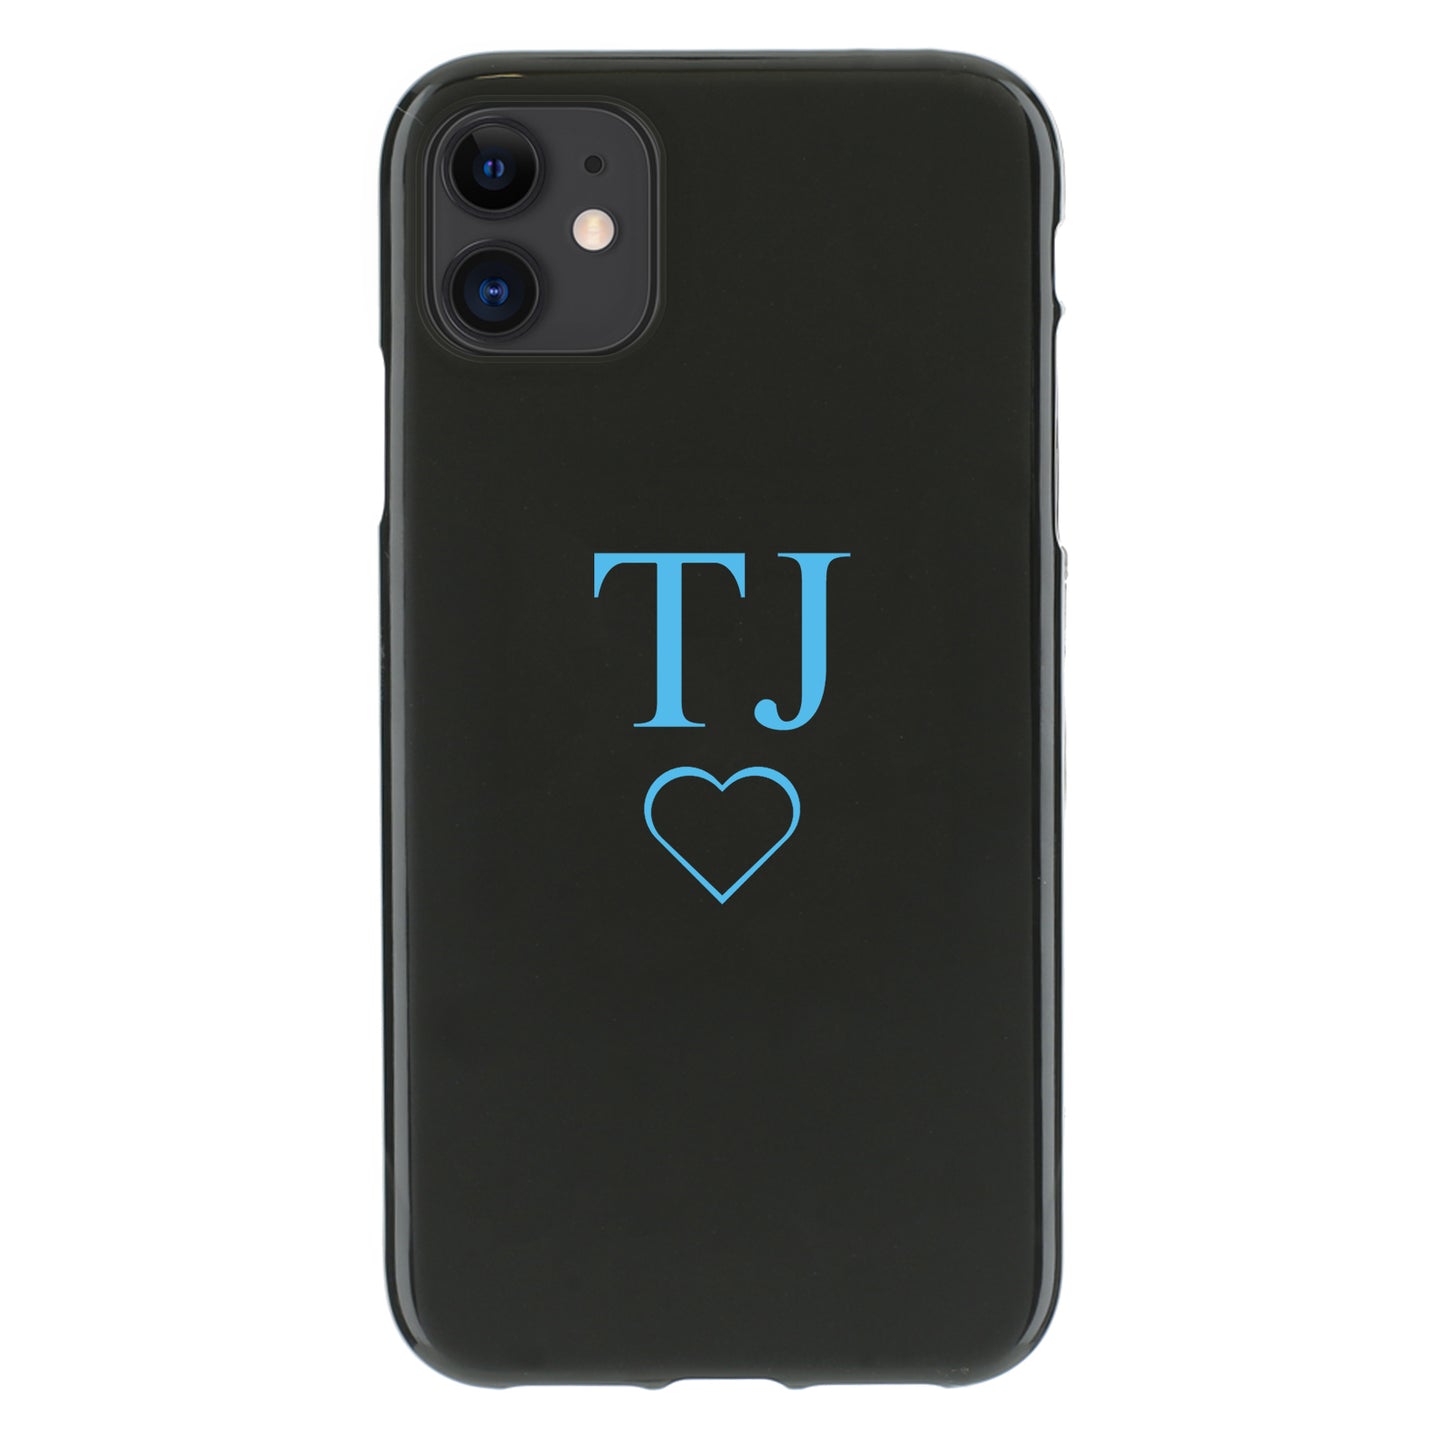 Personalised Nokia Phone Gel Case with Light Blue Block Initials and Heart